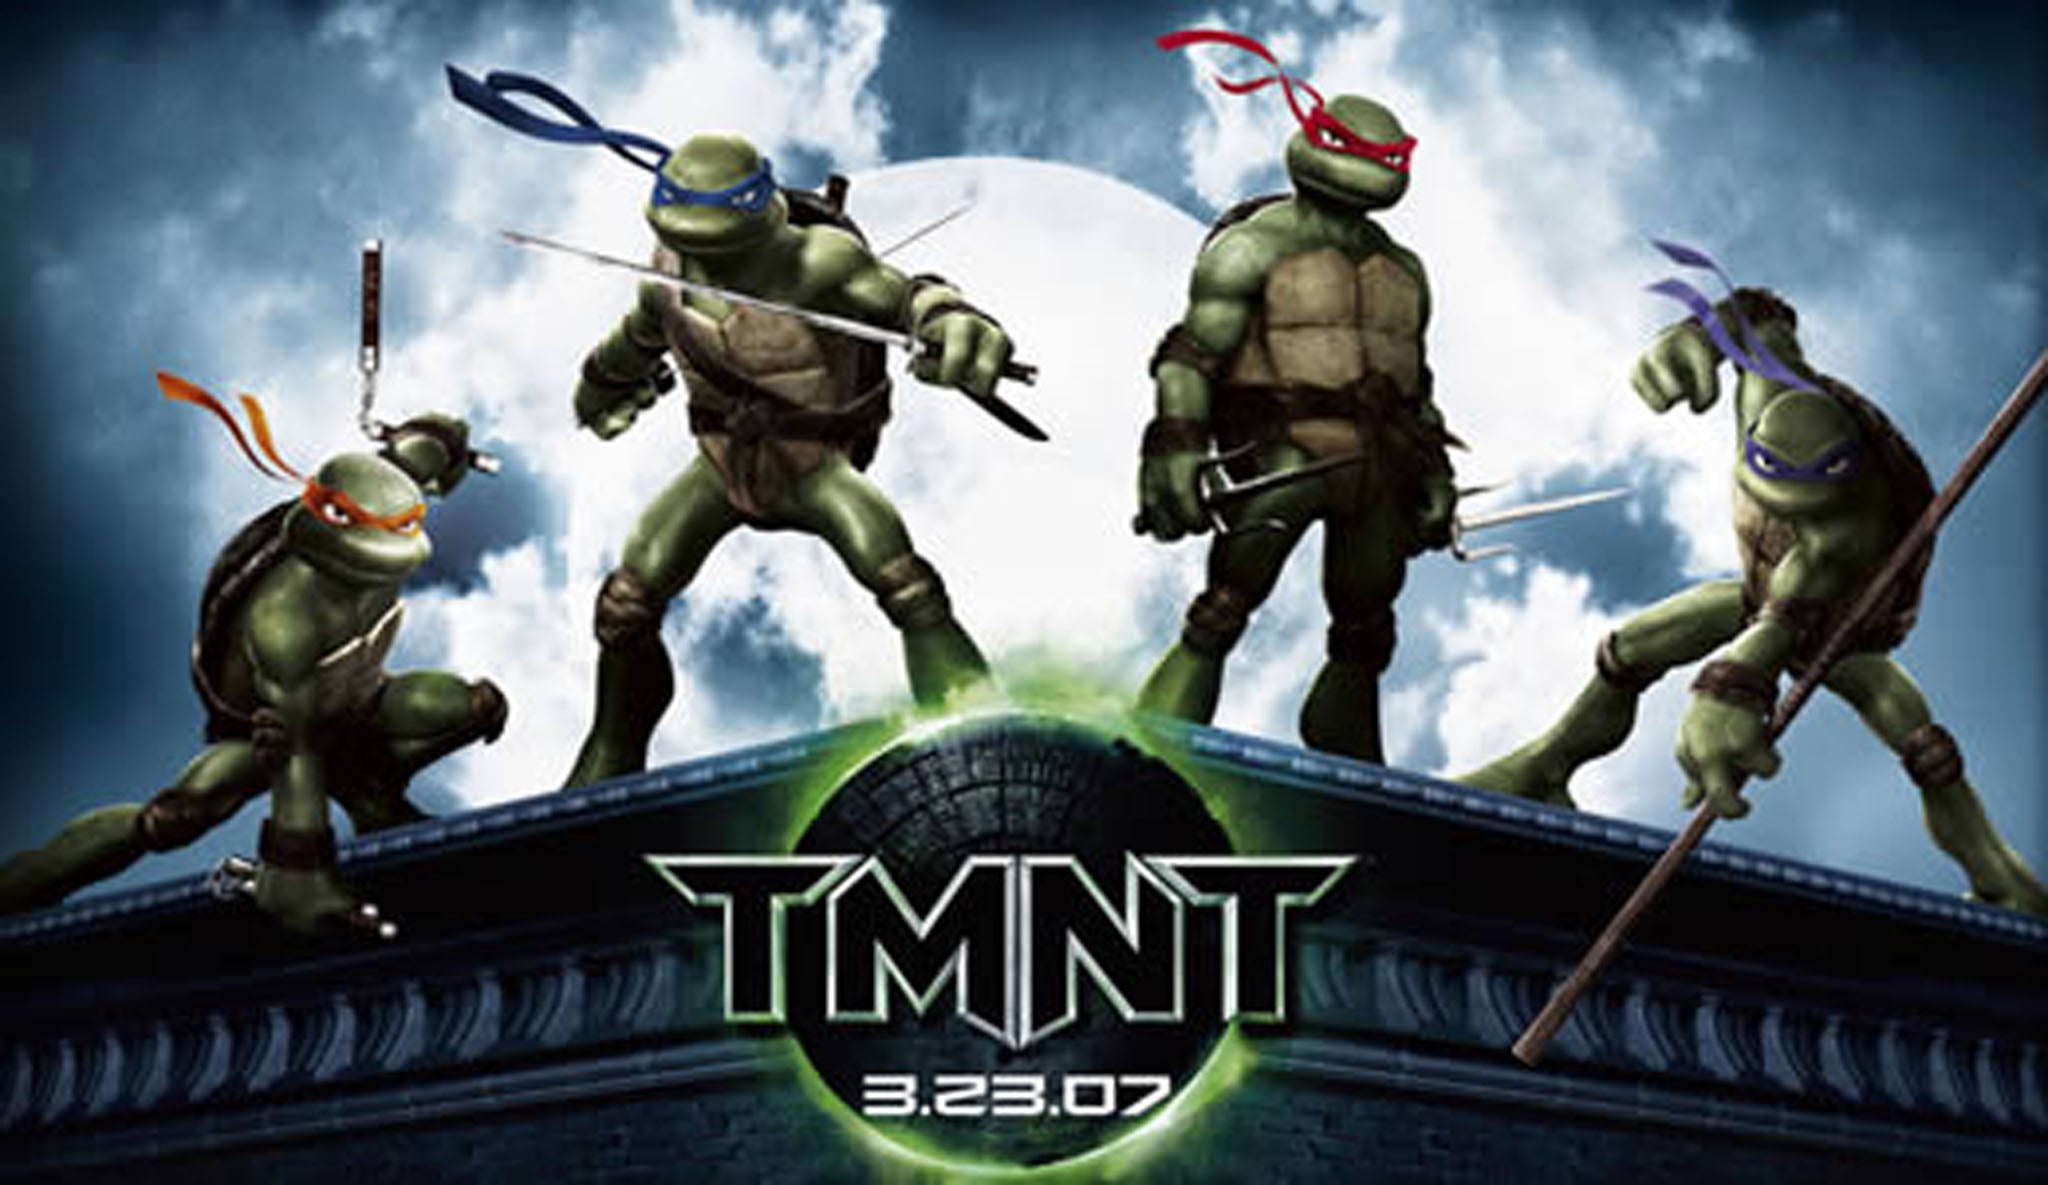 Teenage Mutant Ninja Turtles The Teenage Mutant Ninja Turtles first appeared in a comic book published by Mirage Studios in 1984. The four turtles, Leonardo, Michelangelo, Donatello and Raphael, quickly became household names th